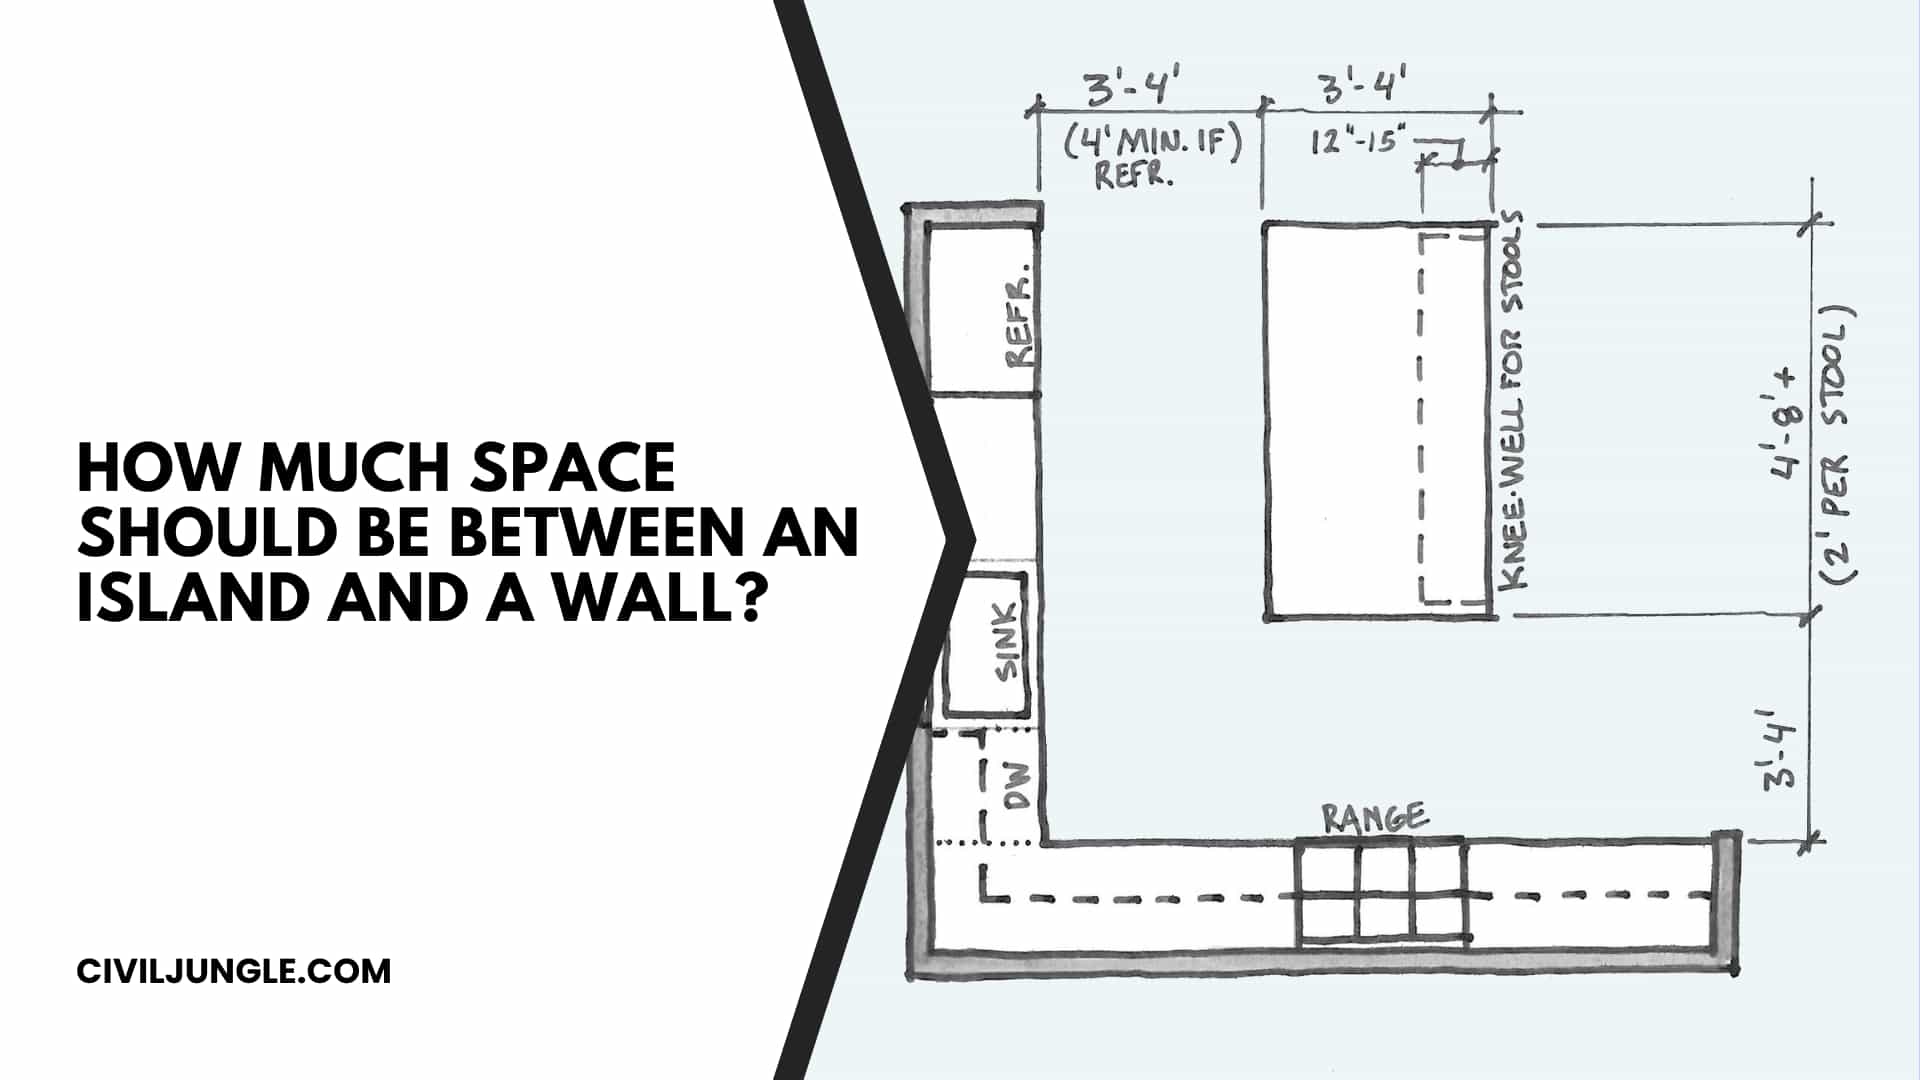 How Much Space Should Be Between an Island and a Wall?